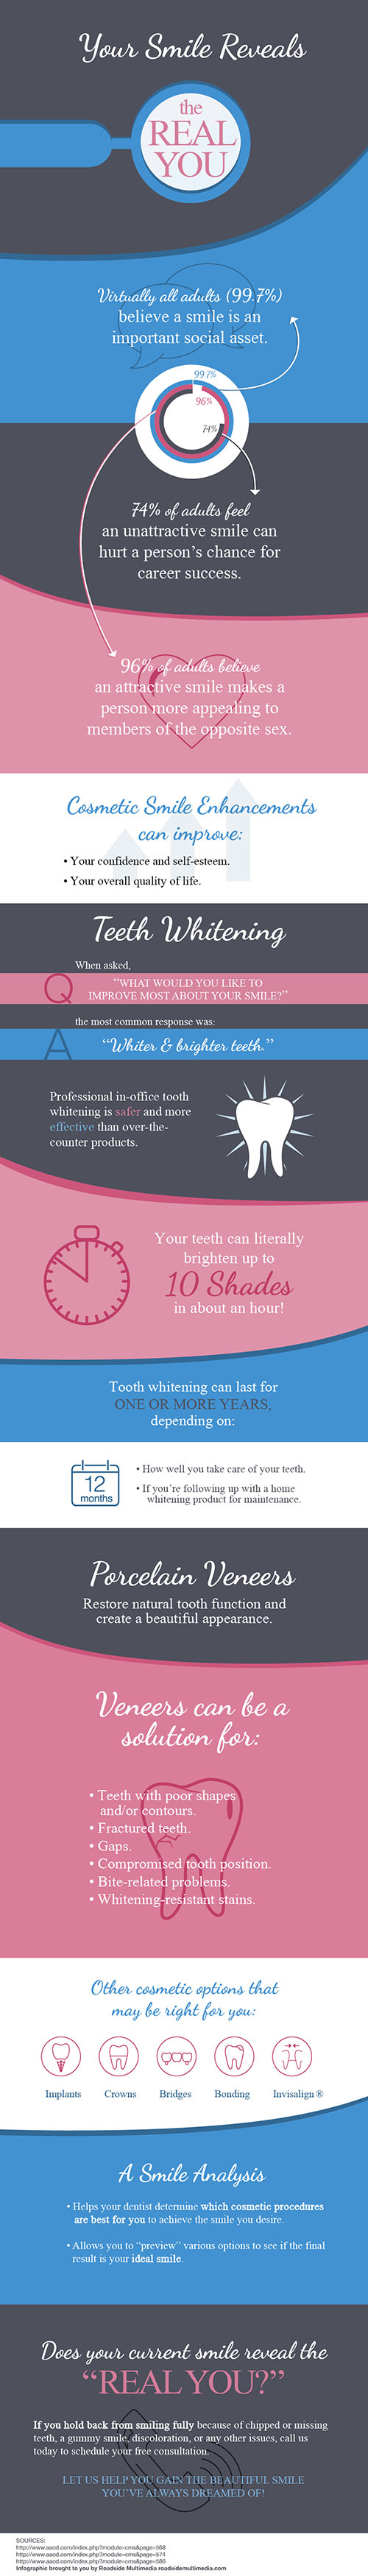 Social Infographic on Cosmetic dentistry enhancements